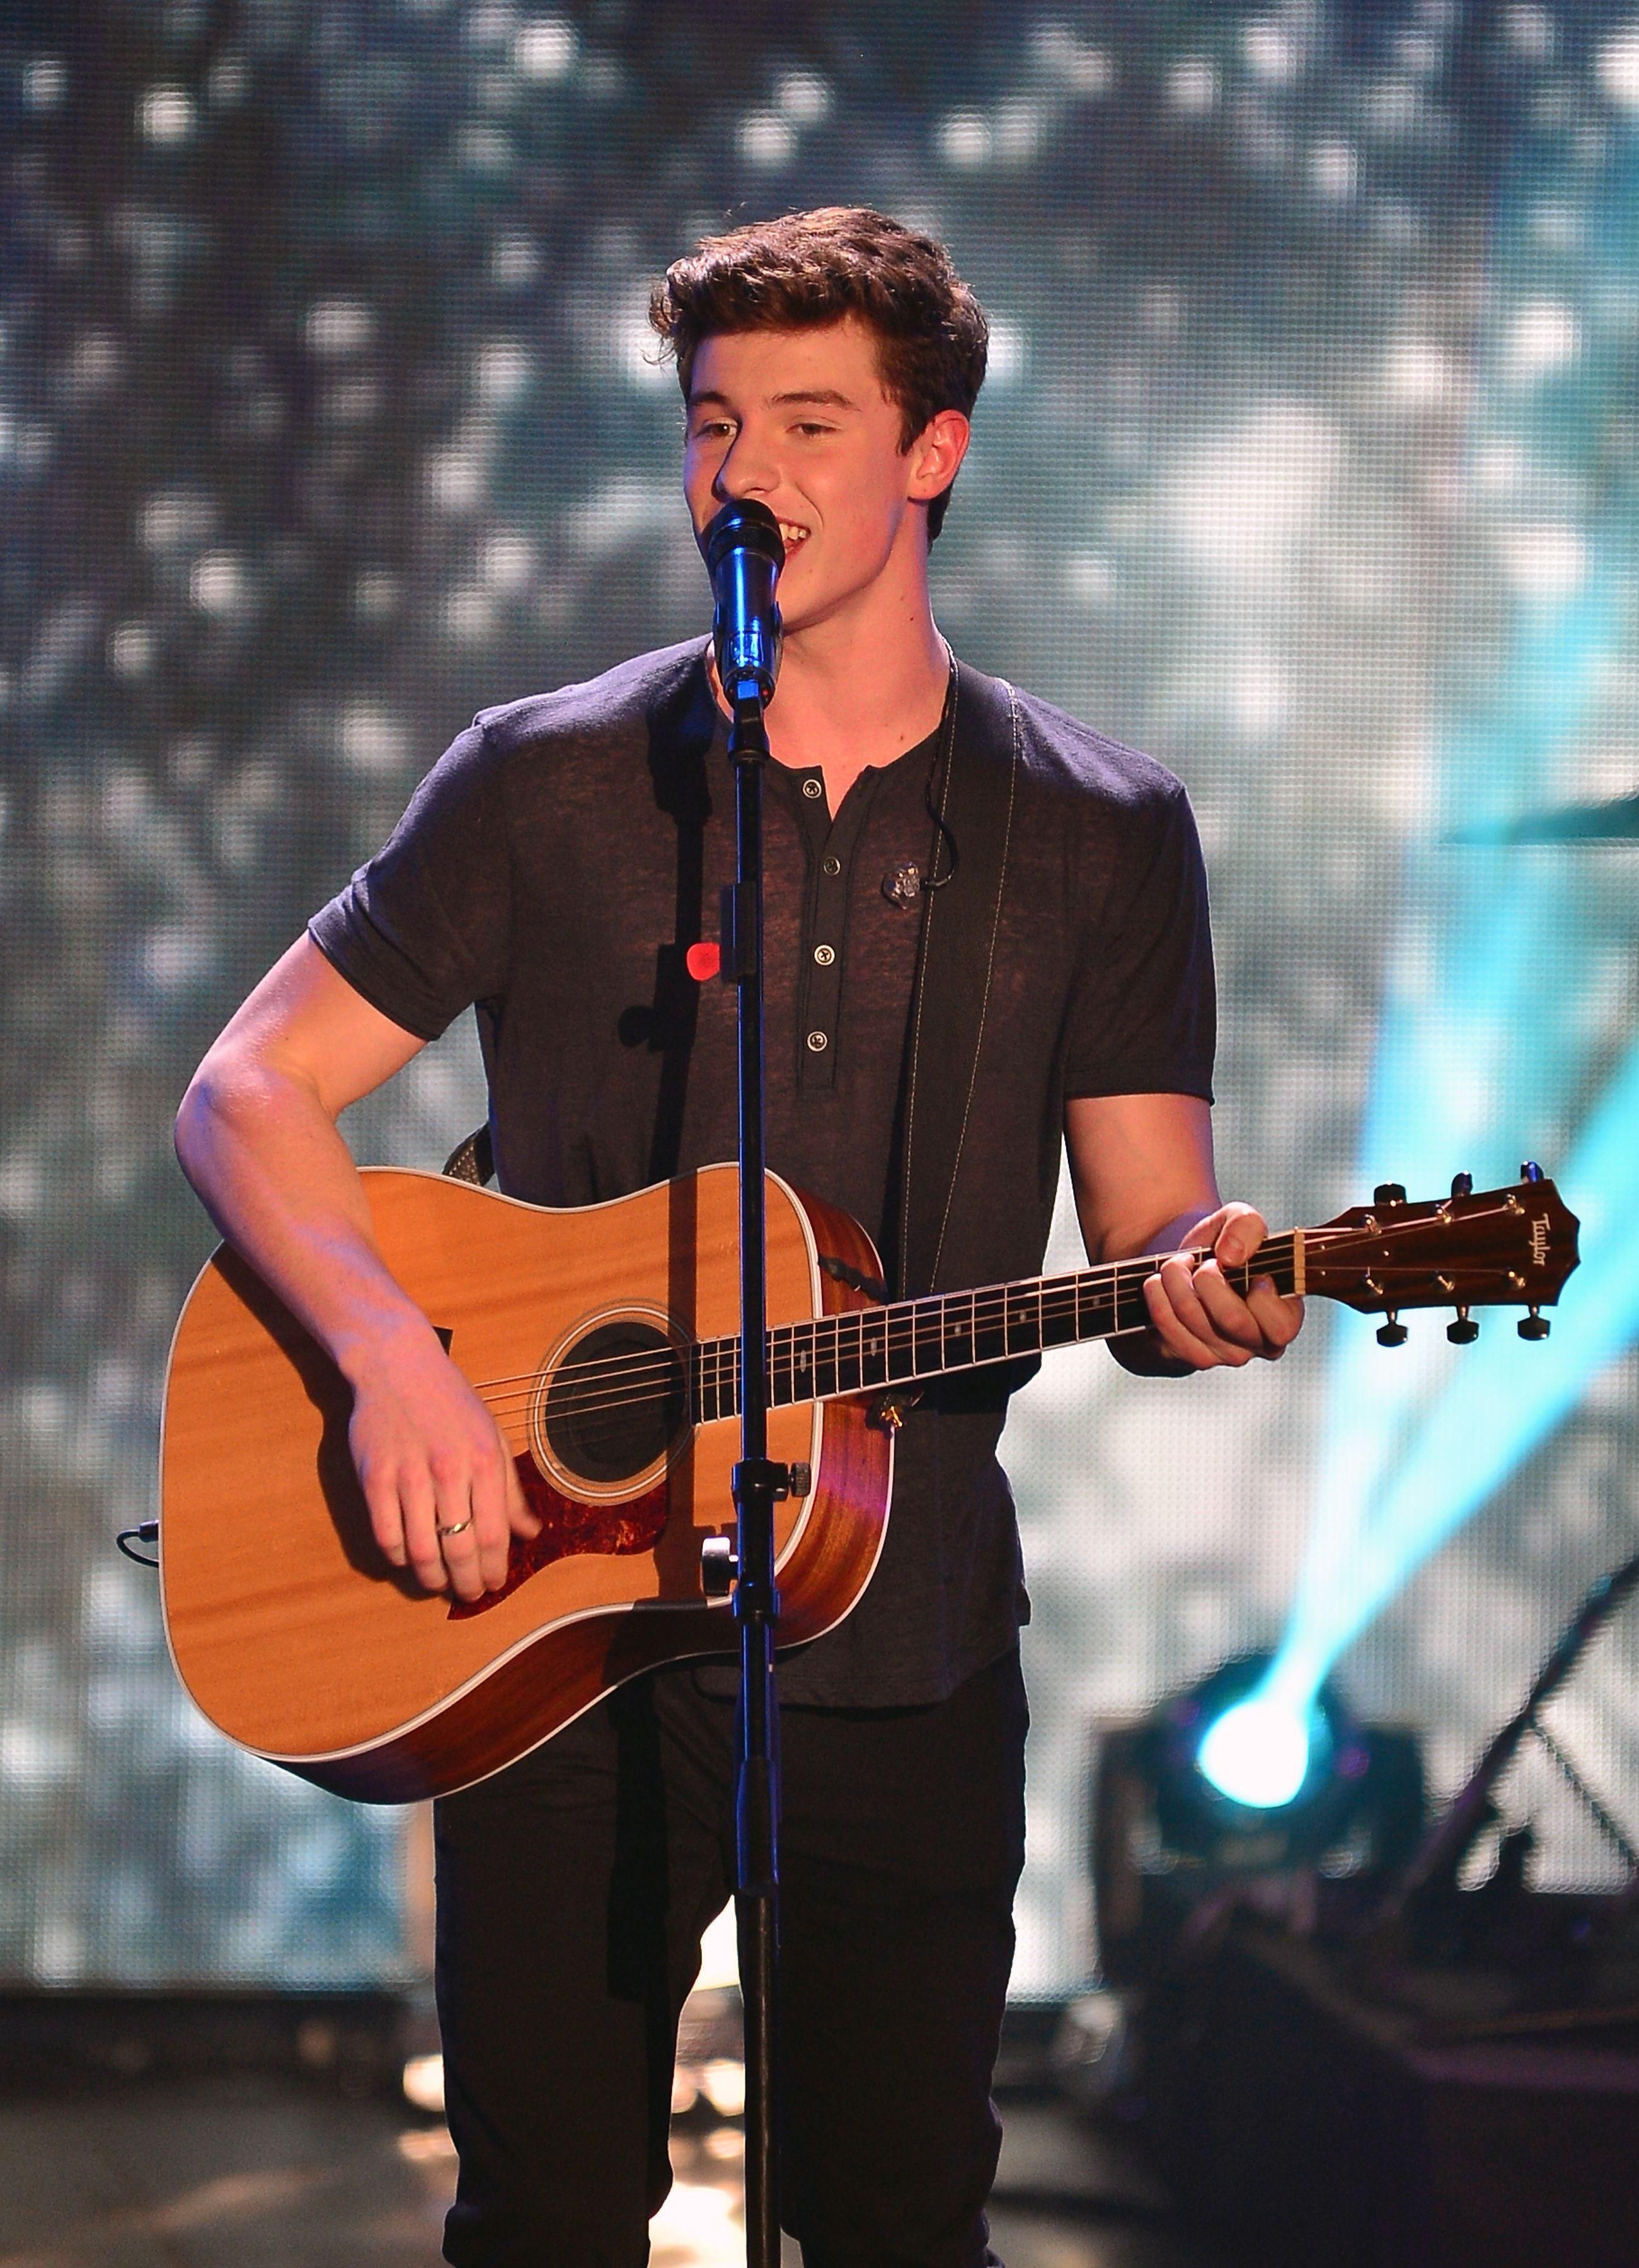 Shawn Mendes HD Image Full Pictures In